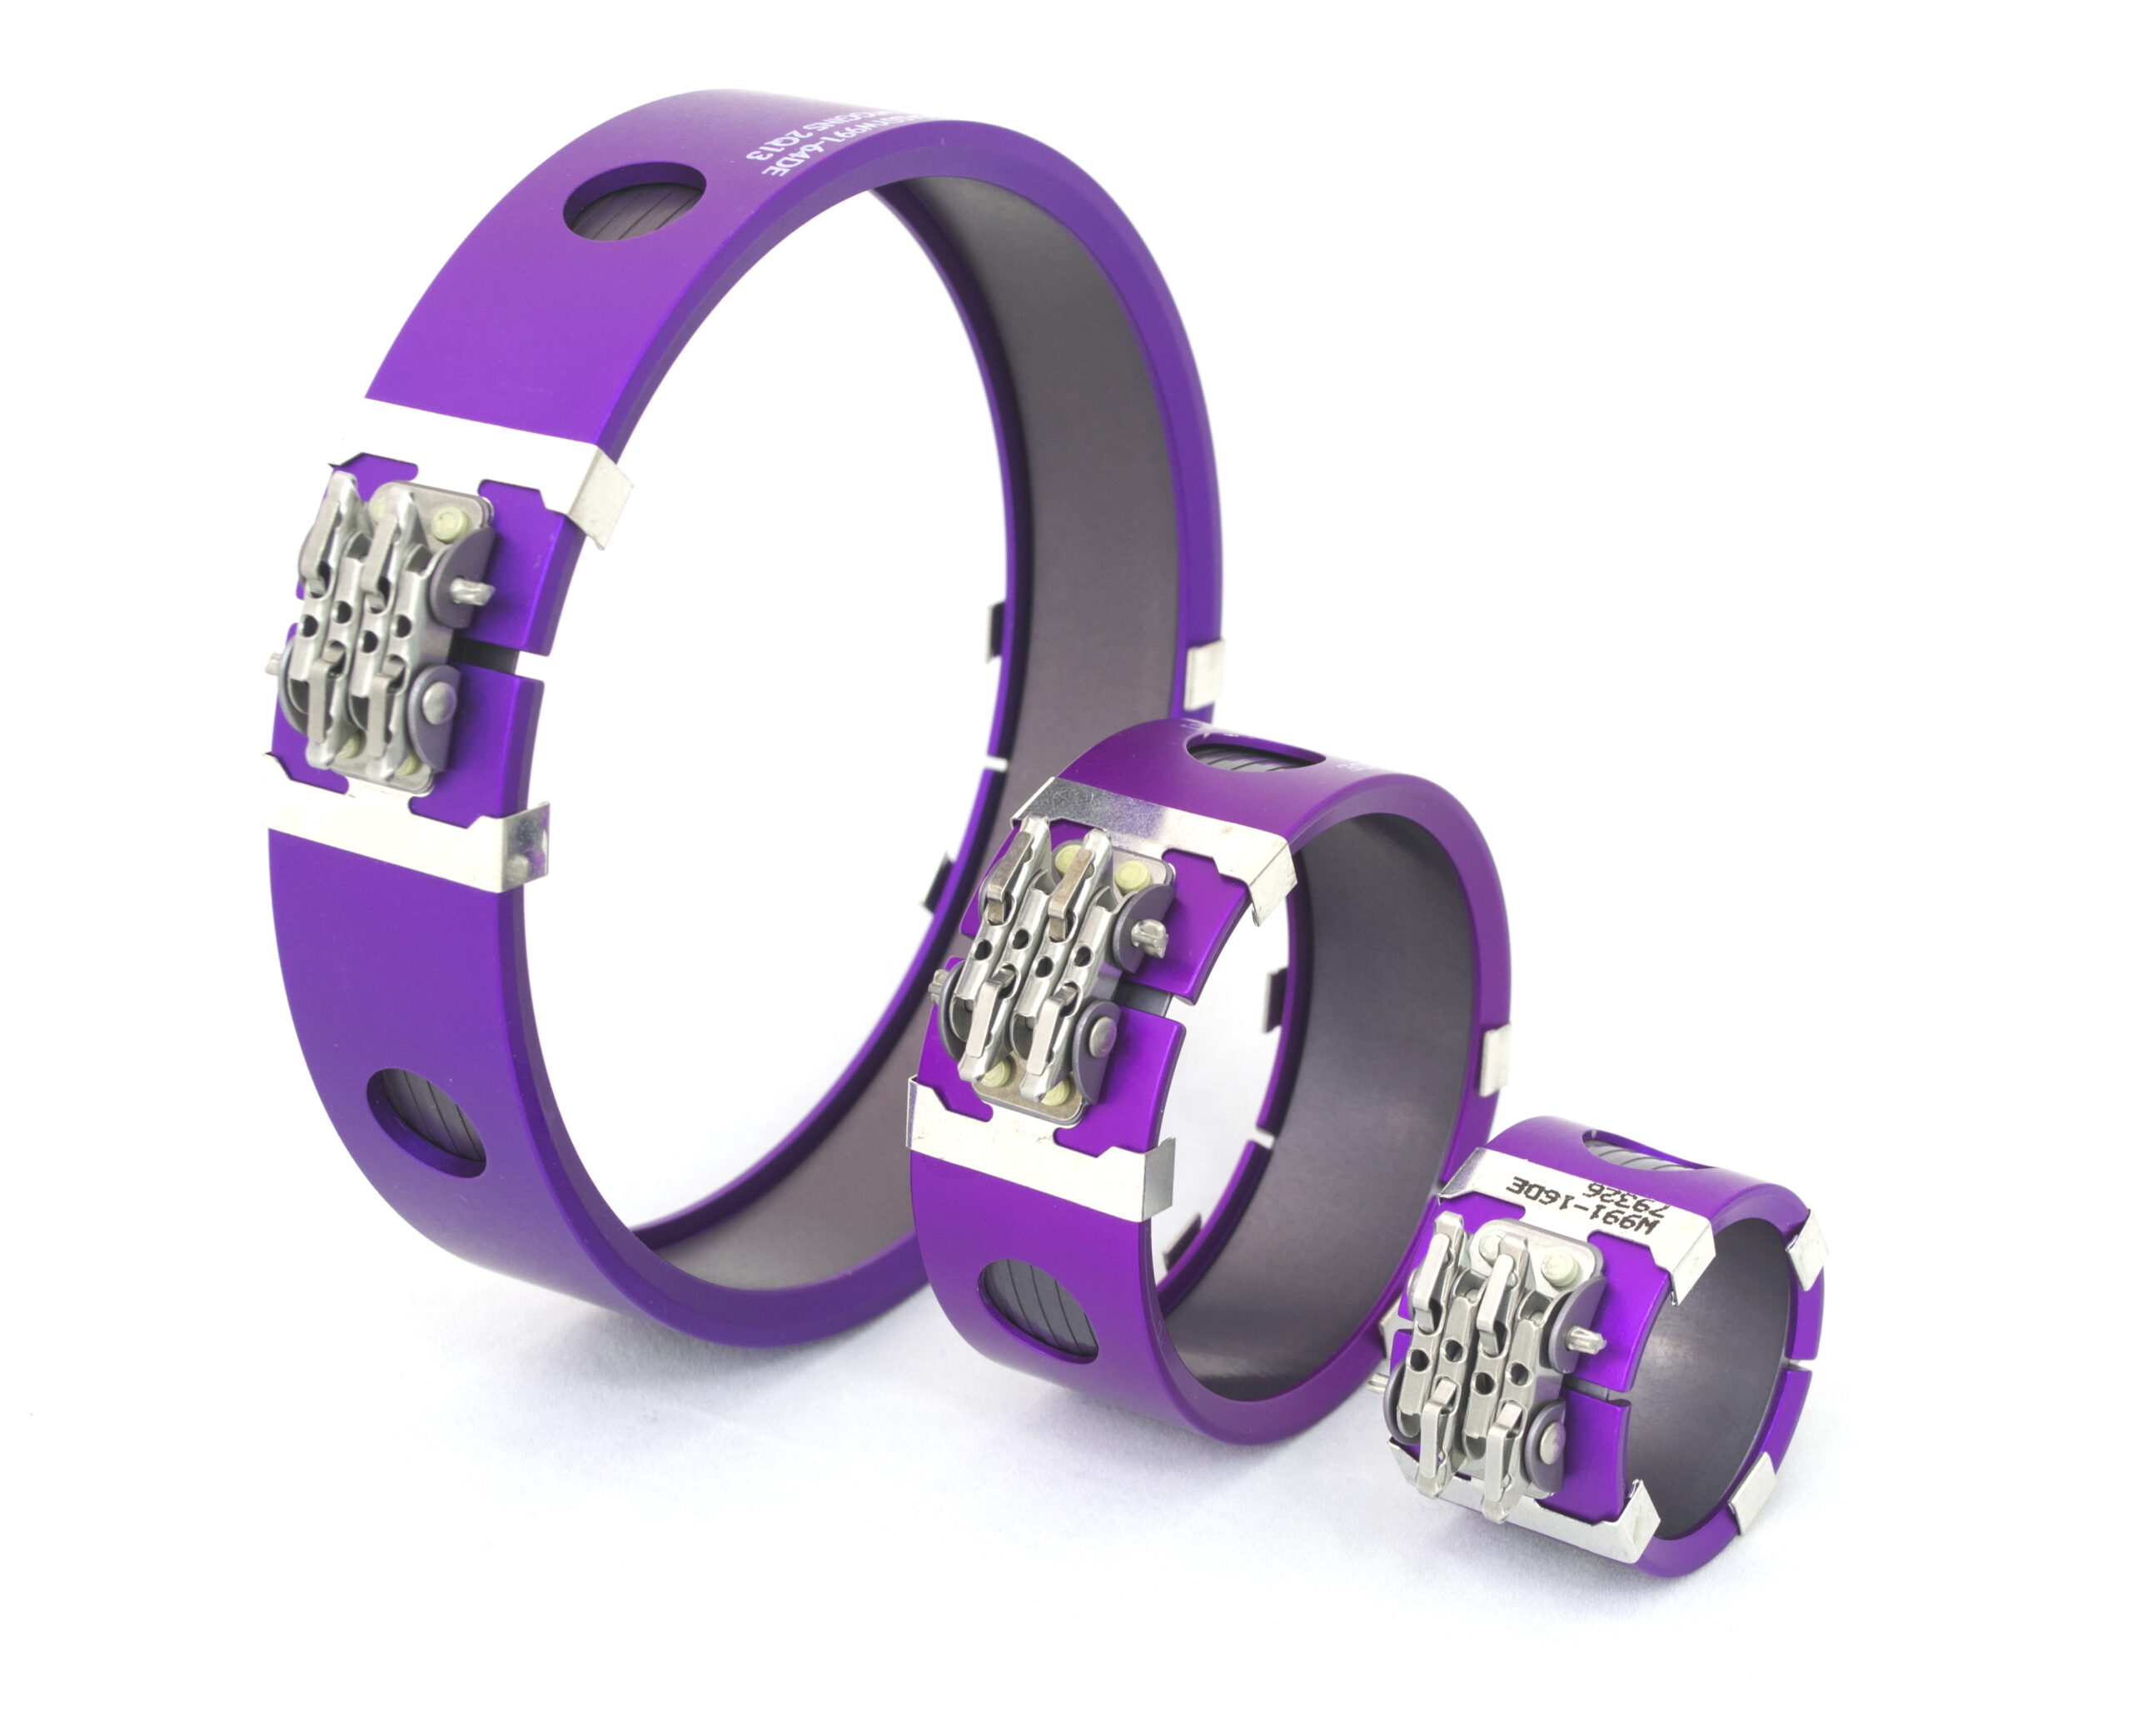 three purple performance wristbands with numerical combination locks on a white background.